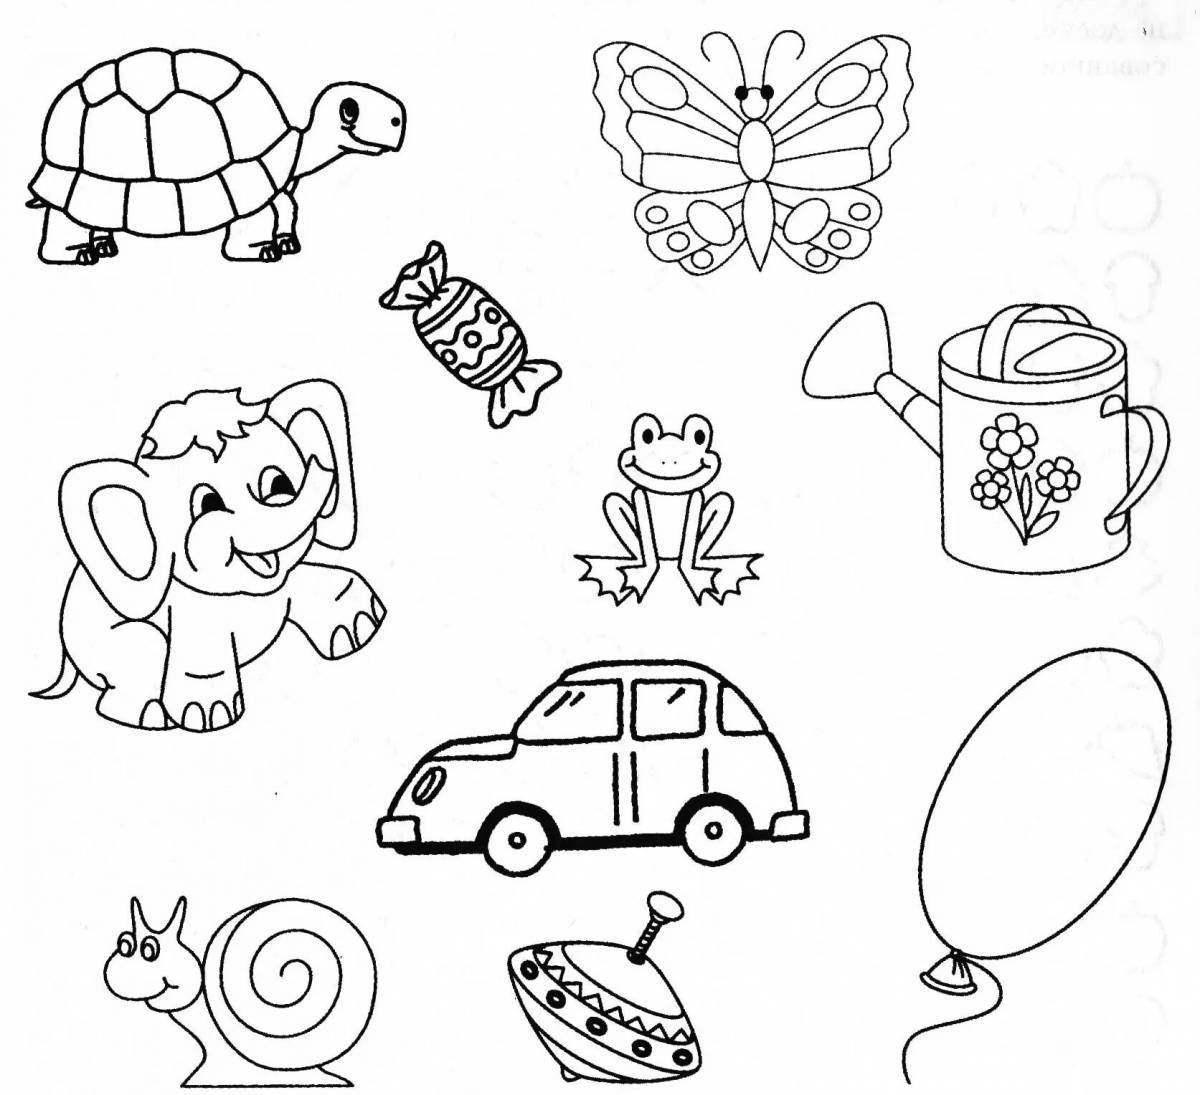 Amazing nature coloring pages for kids